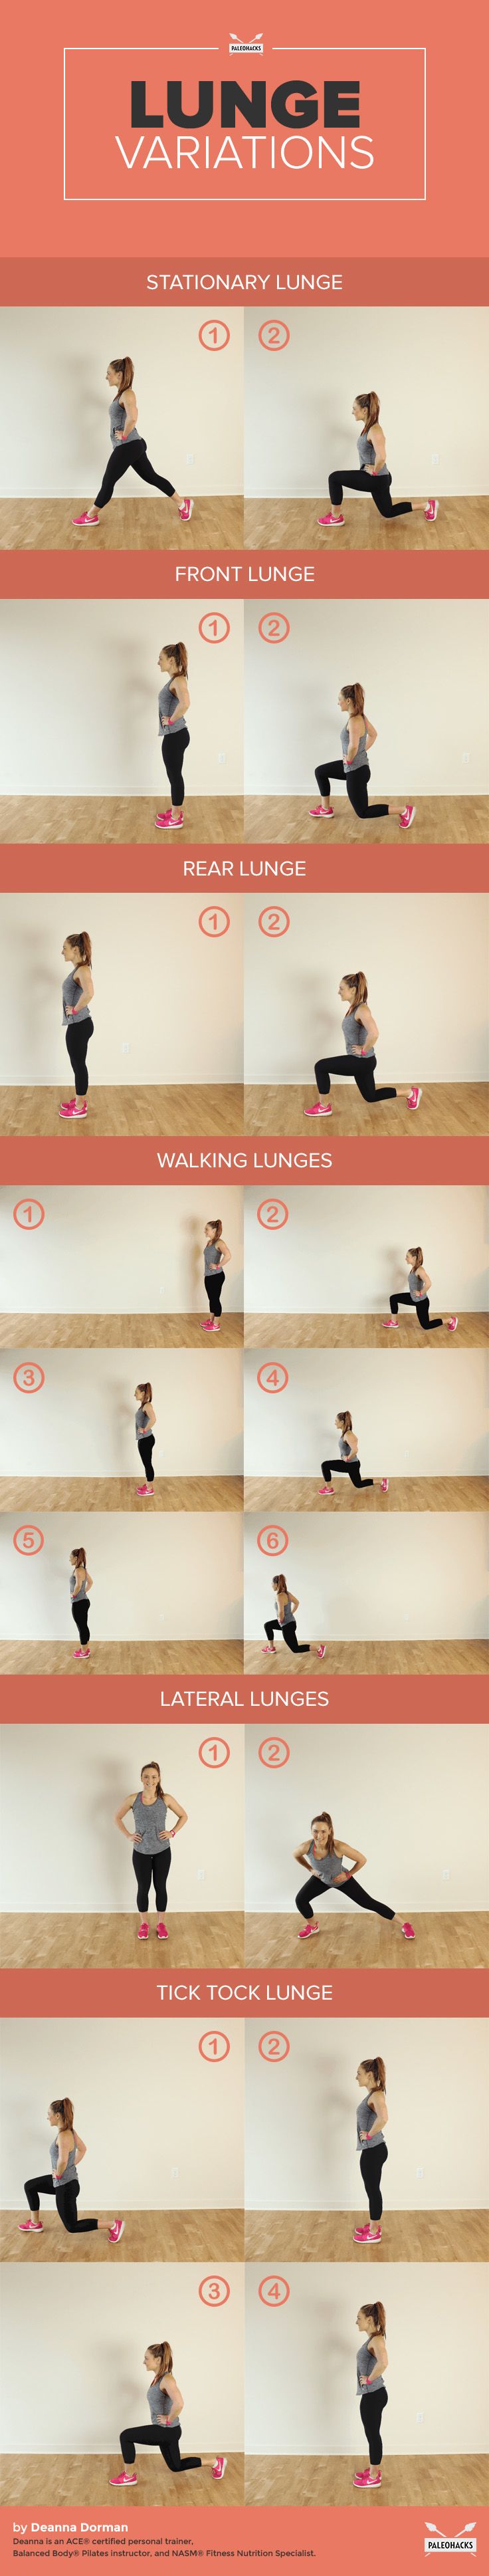 How to Do a Lunge